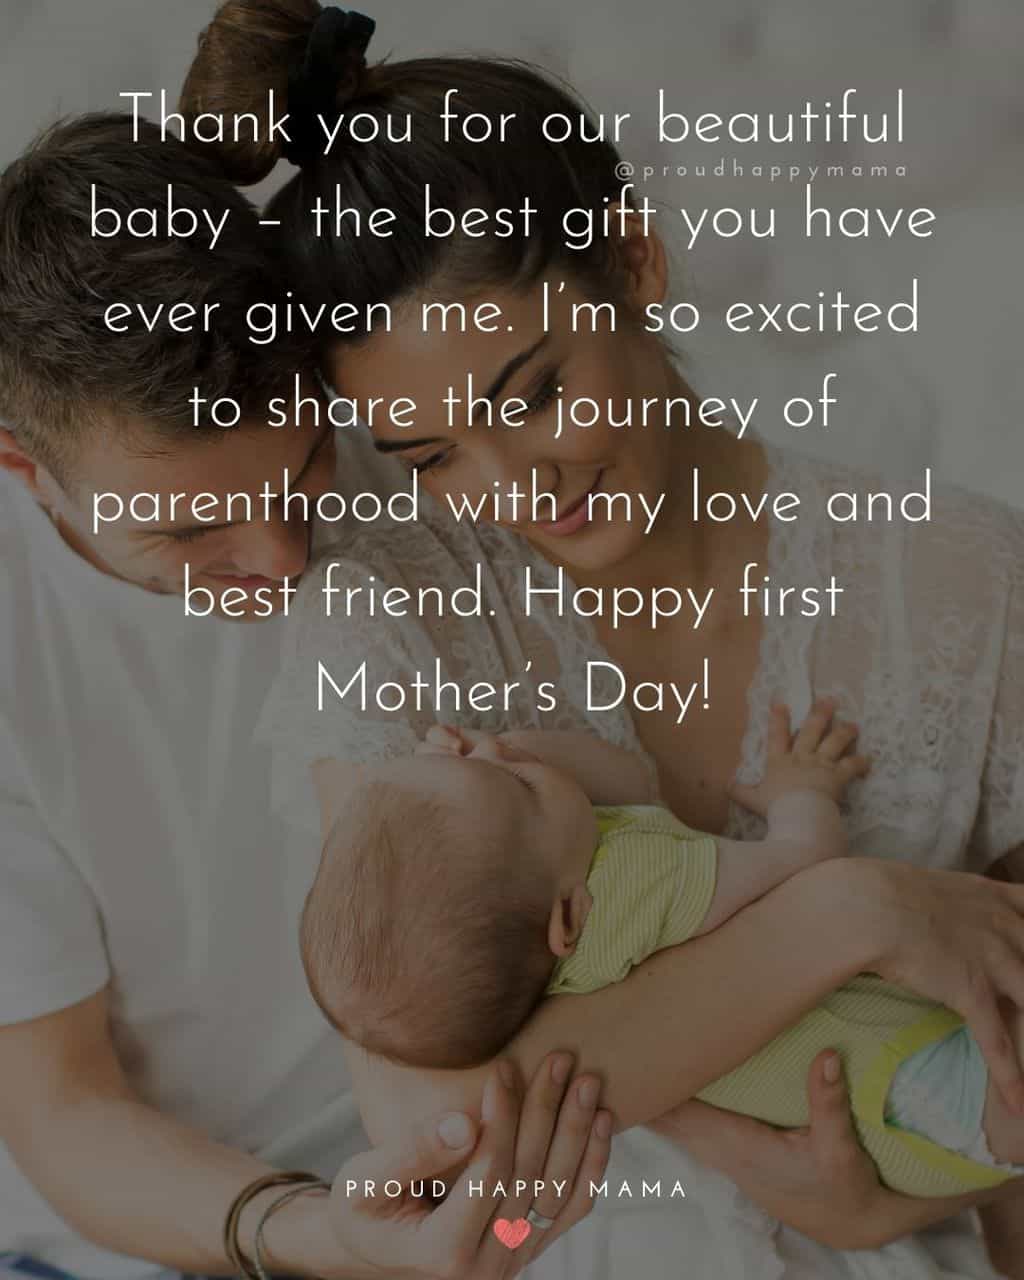 First Mothers Day Quotes - Thank you for our beautiful baby – the best gift you have ever given me. I’m so excited to share the journey